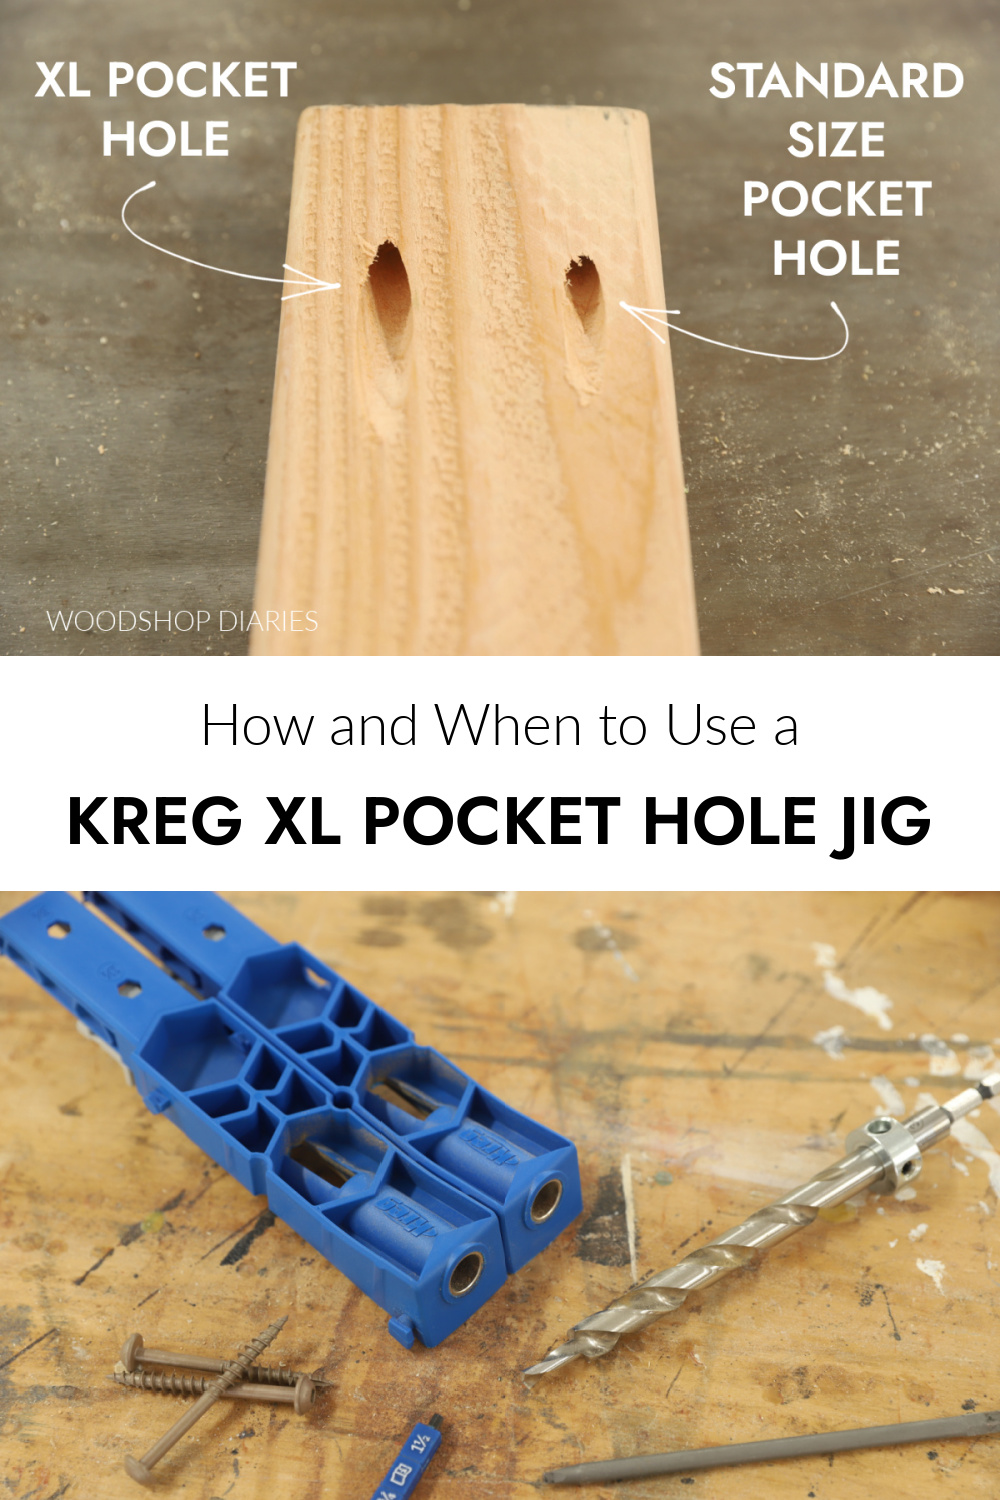 Pinterest collage image showing XL and standard size pocket hole size comparison at top and driving pocket hole screws through 4x4 on bottom with text "how and when to use a Kreg XL pocket hole jig"